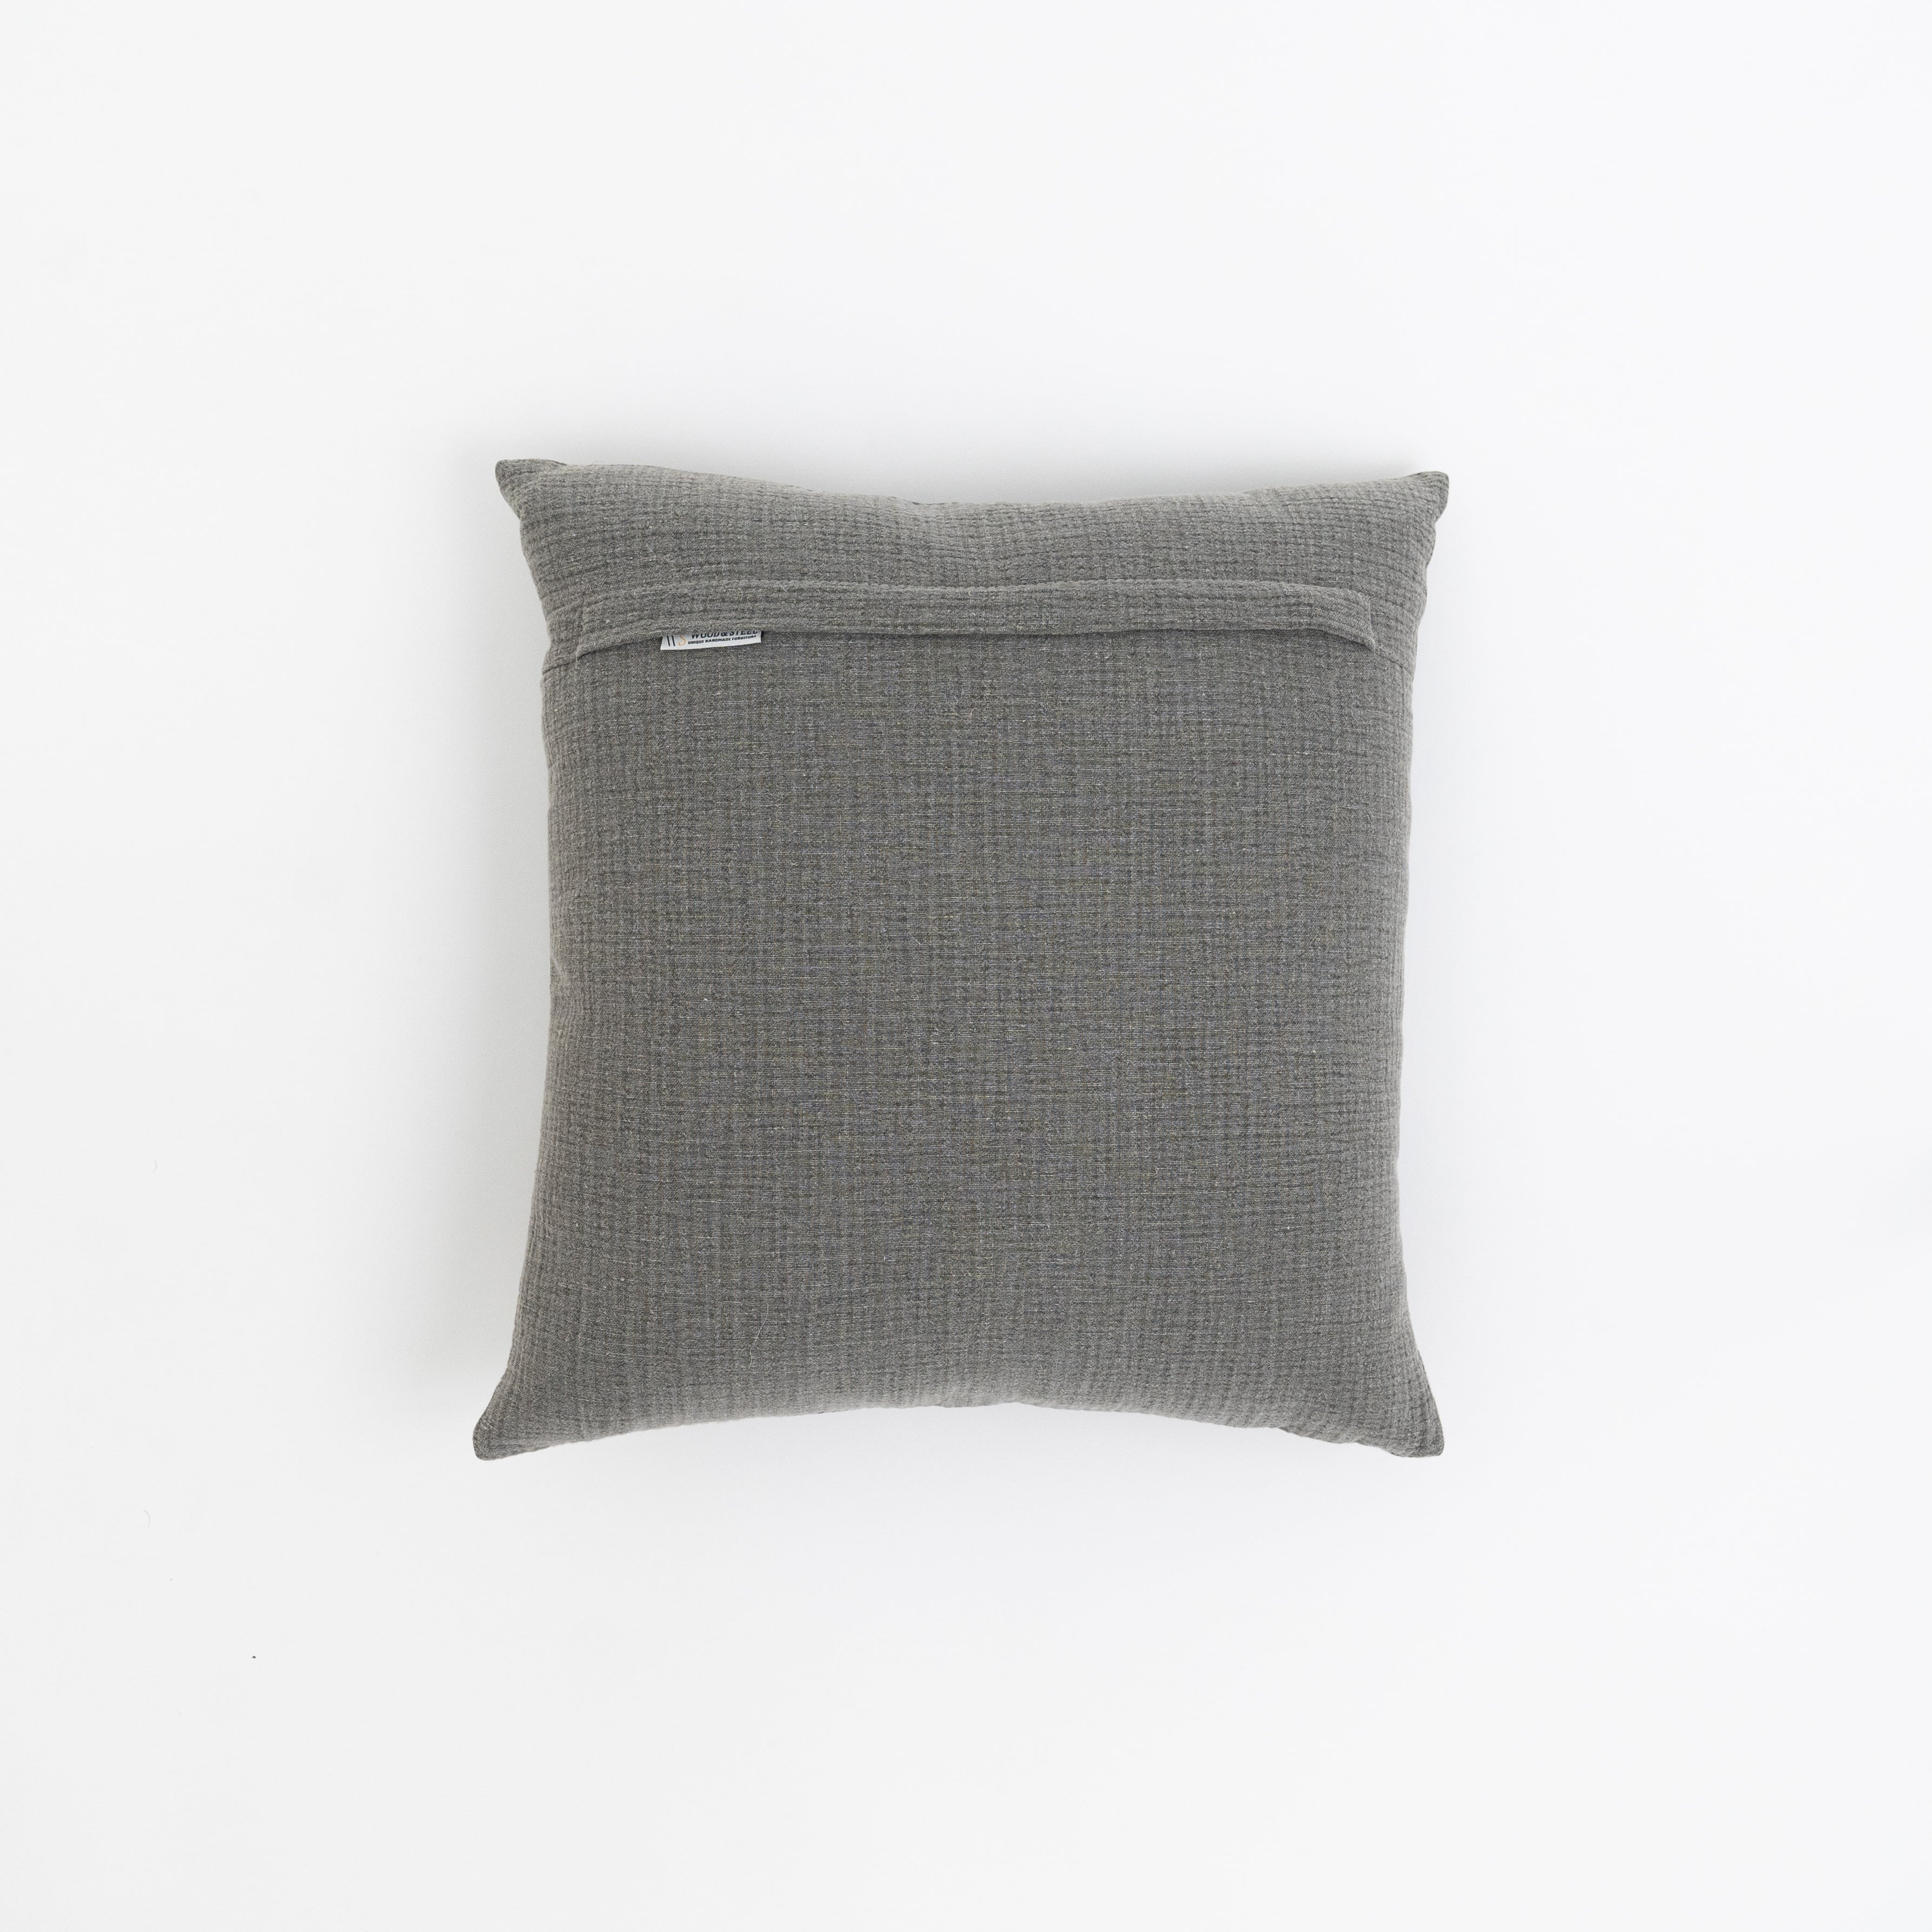 Cushion Cover Grey 45 x45cm - Wood and Steel Furnitures